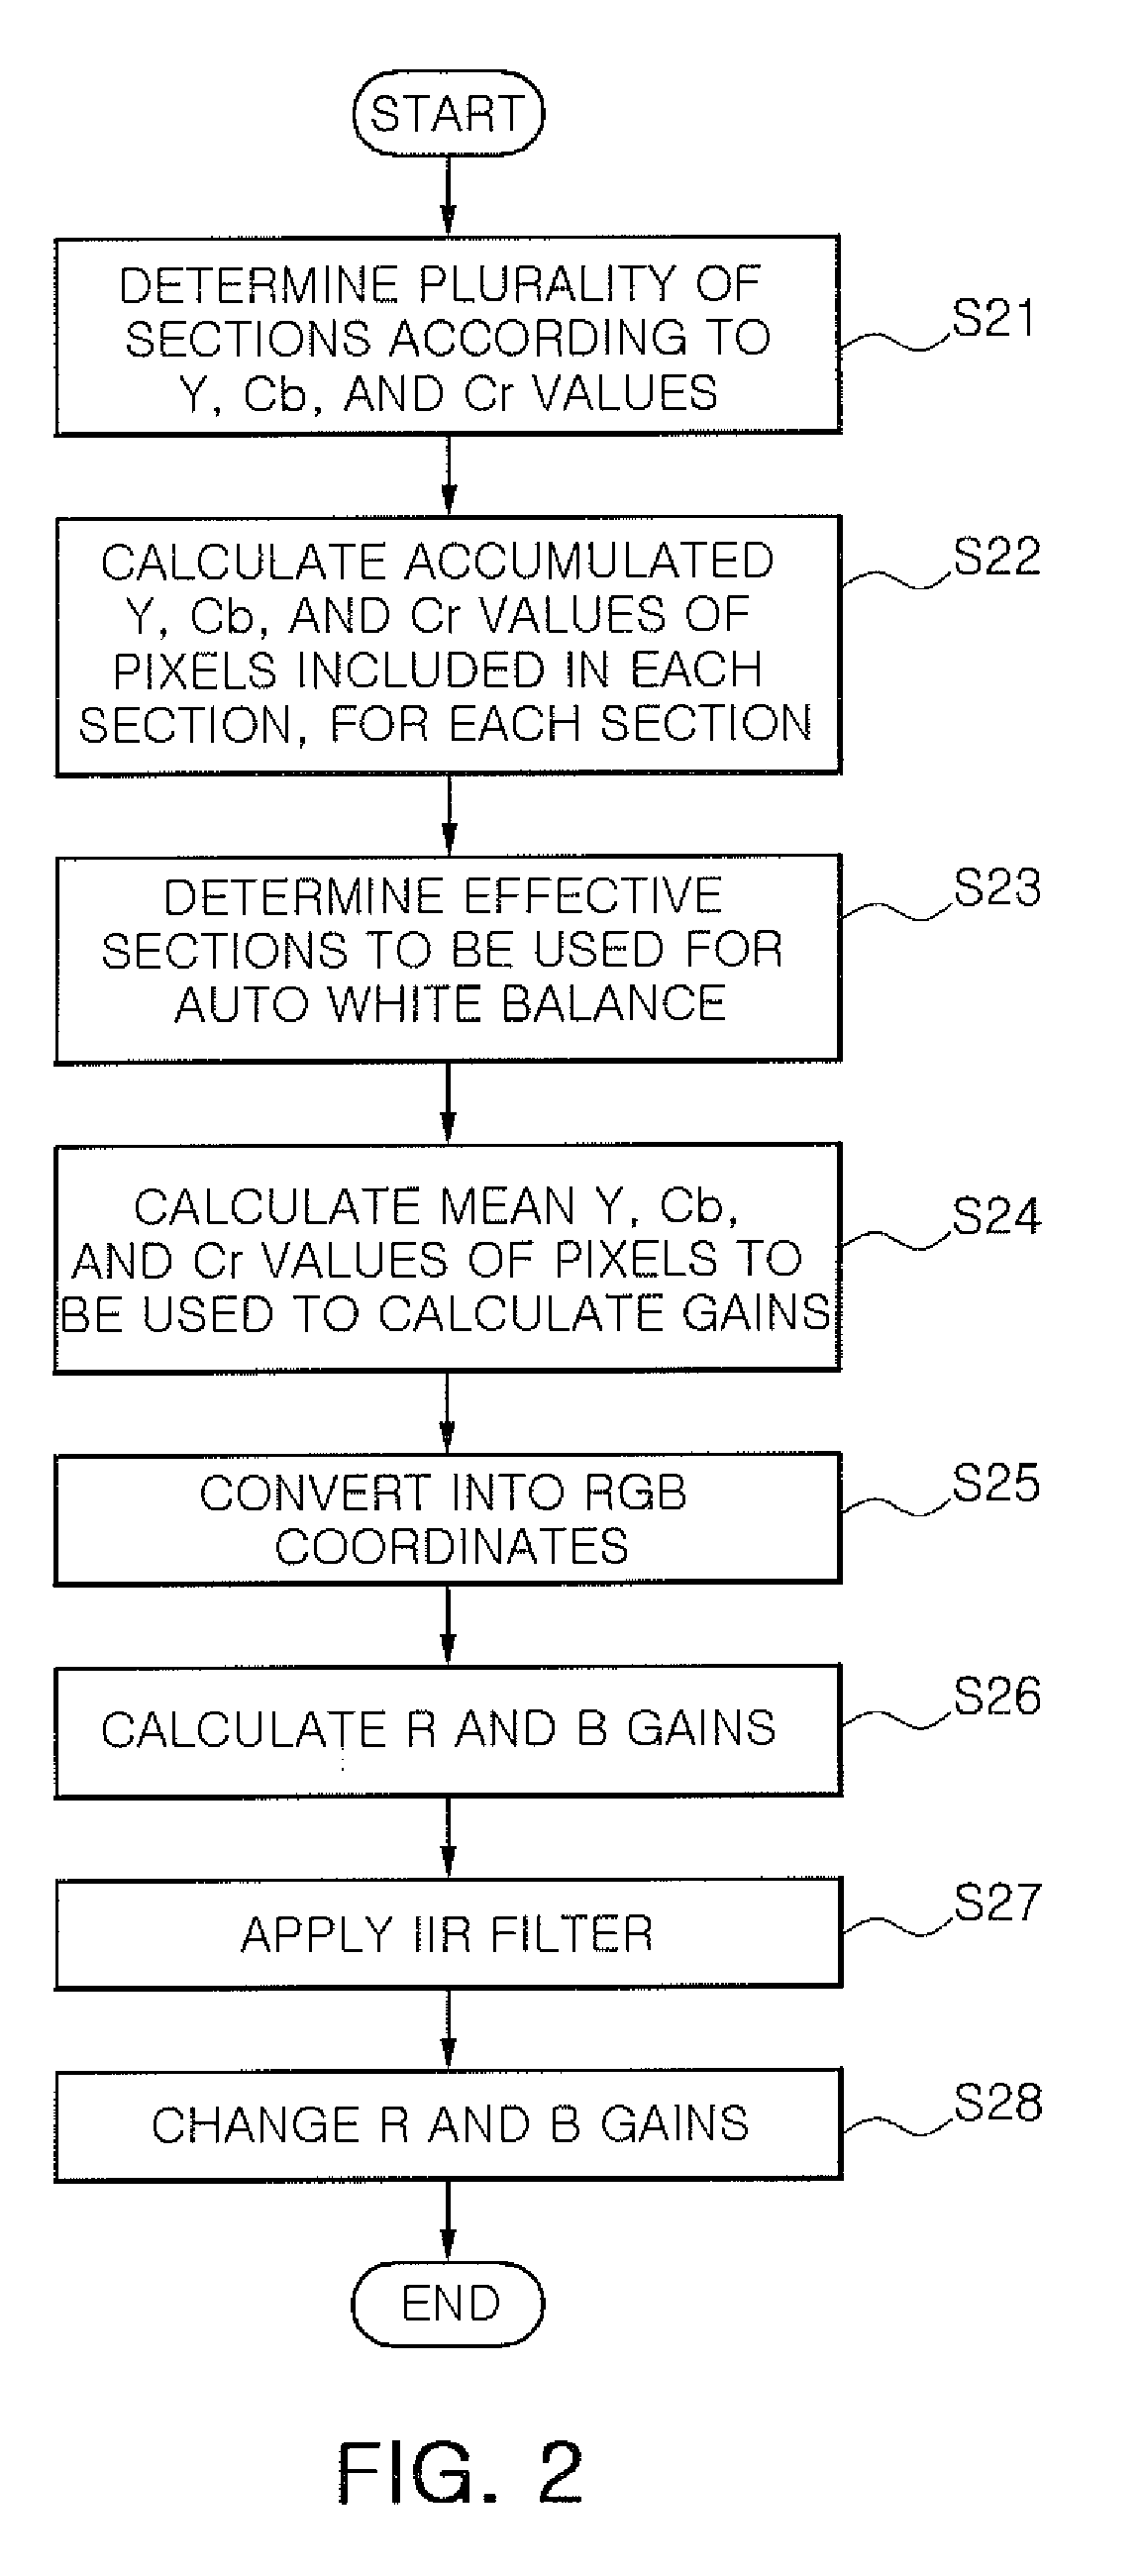 Method of performing auto white balance in ycbcr color space